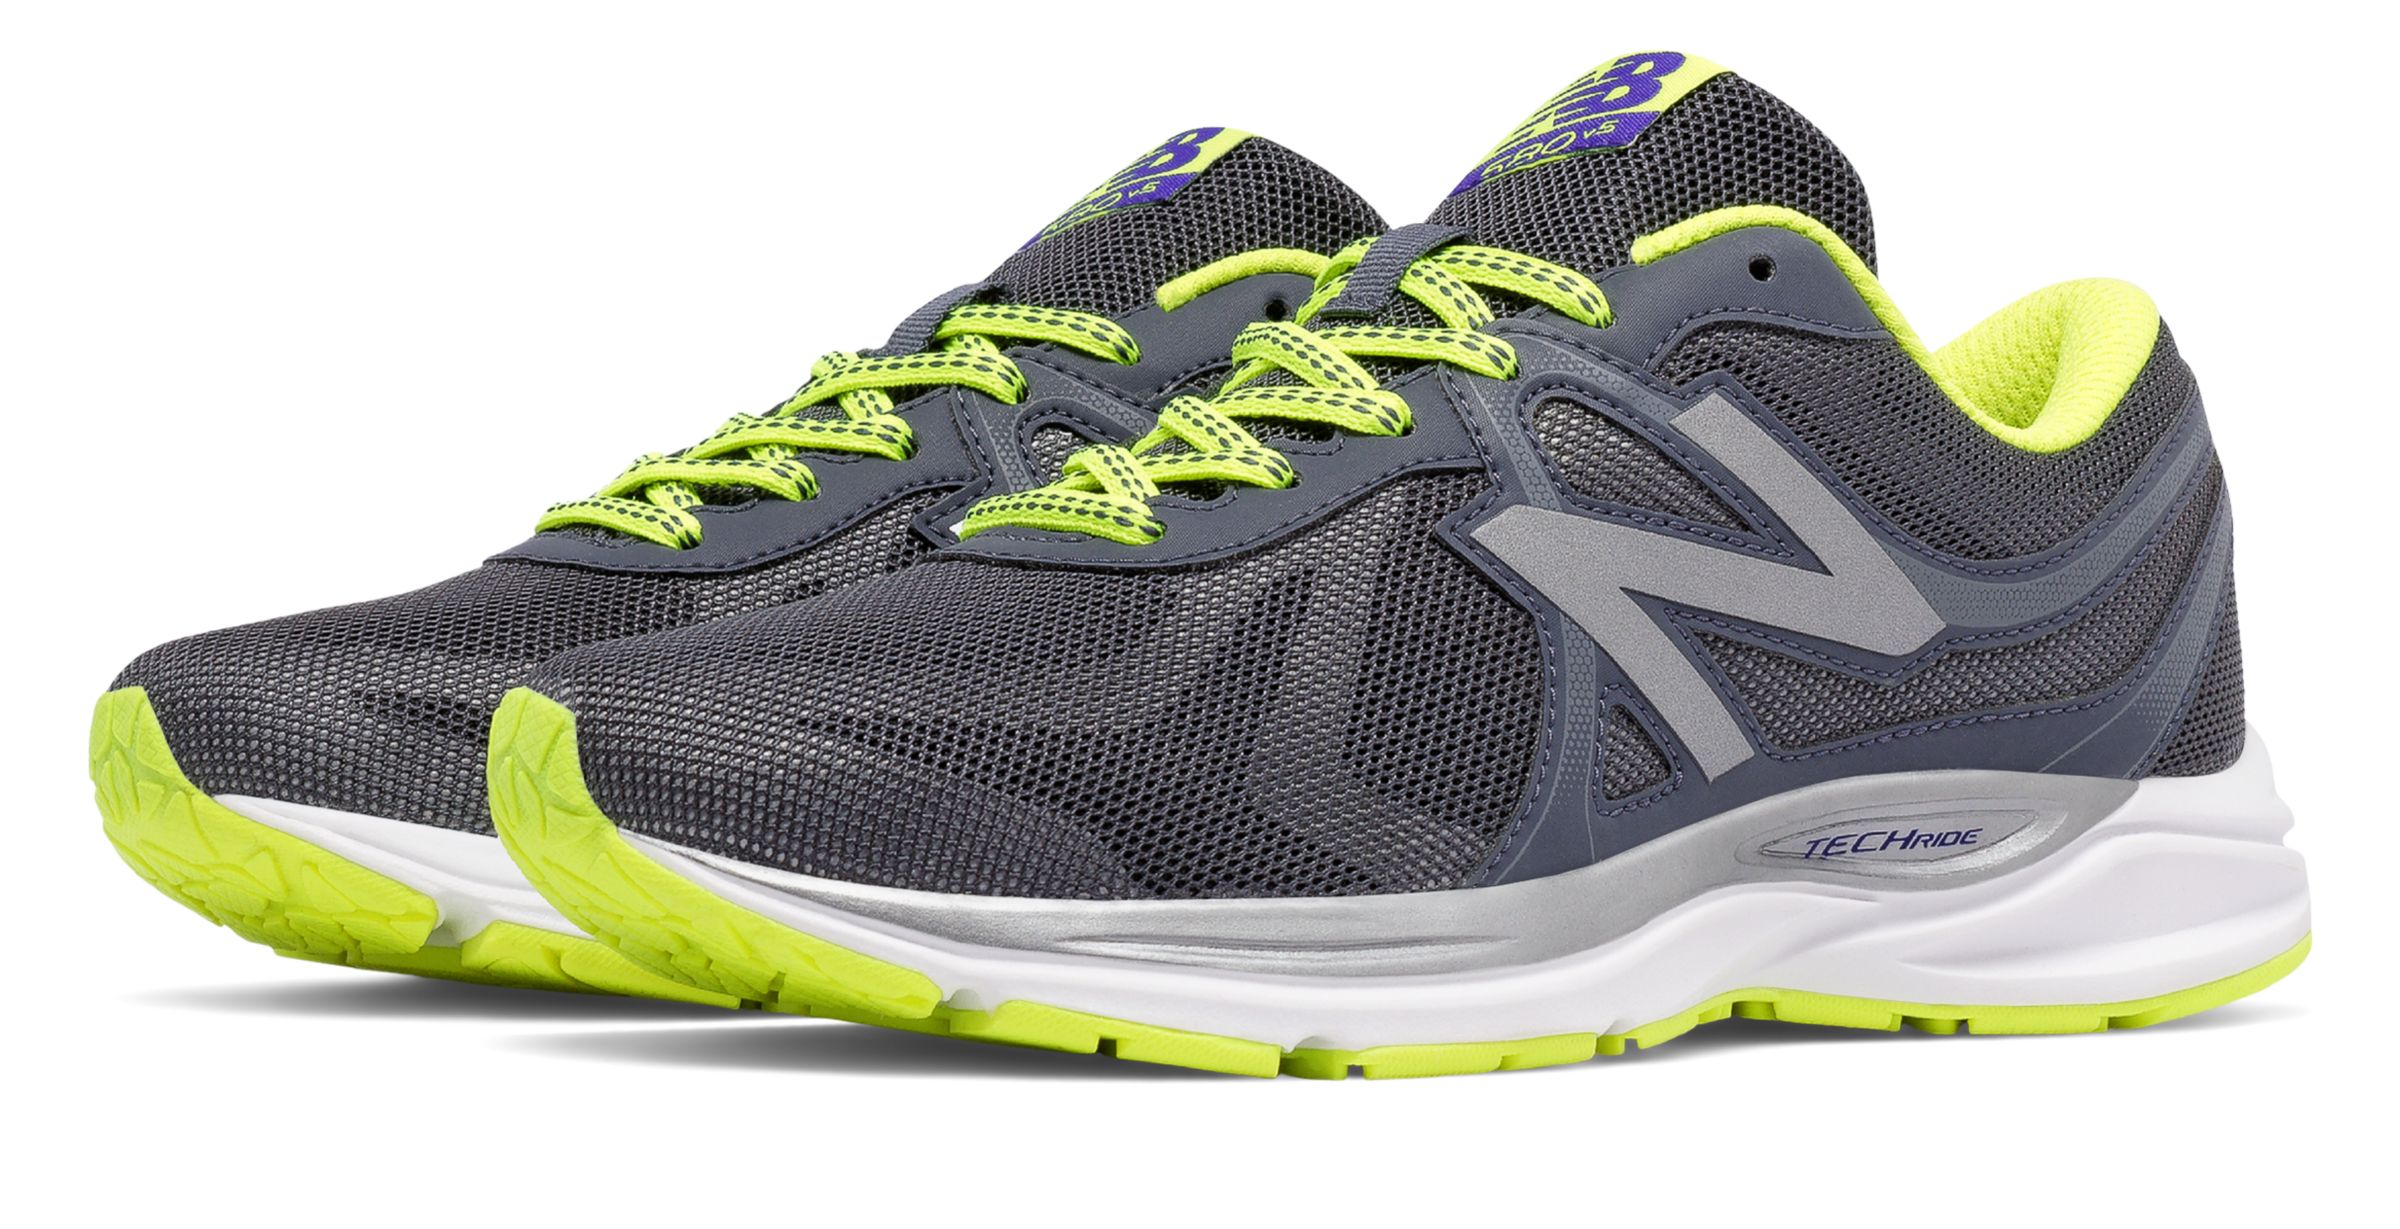 New Balance W580-V5 on Sale - Discounts Up to 18% Off on W580LG5. Joe\u0027s New  Balance Outlet featuring discount shoes ...